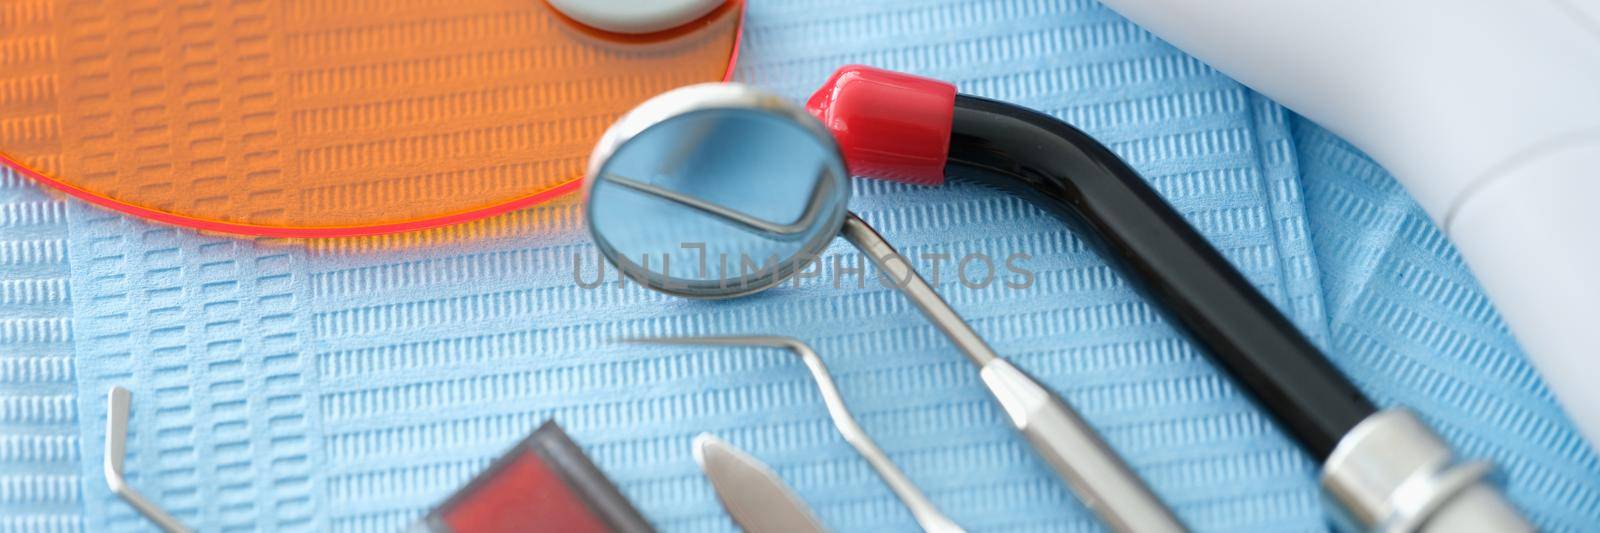 Dental instruments and denture lie on a blue medical napkin by kuprevich